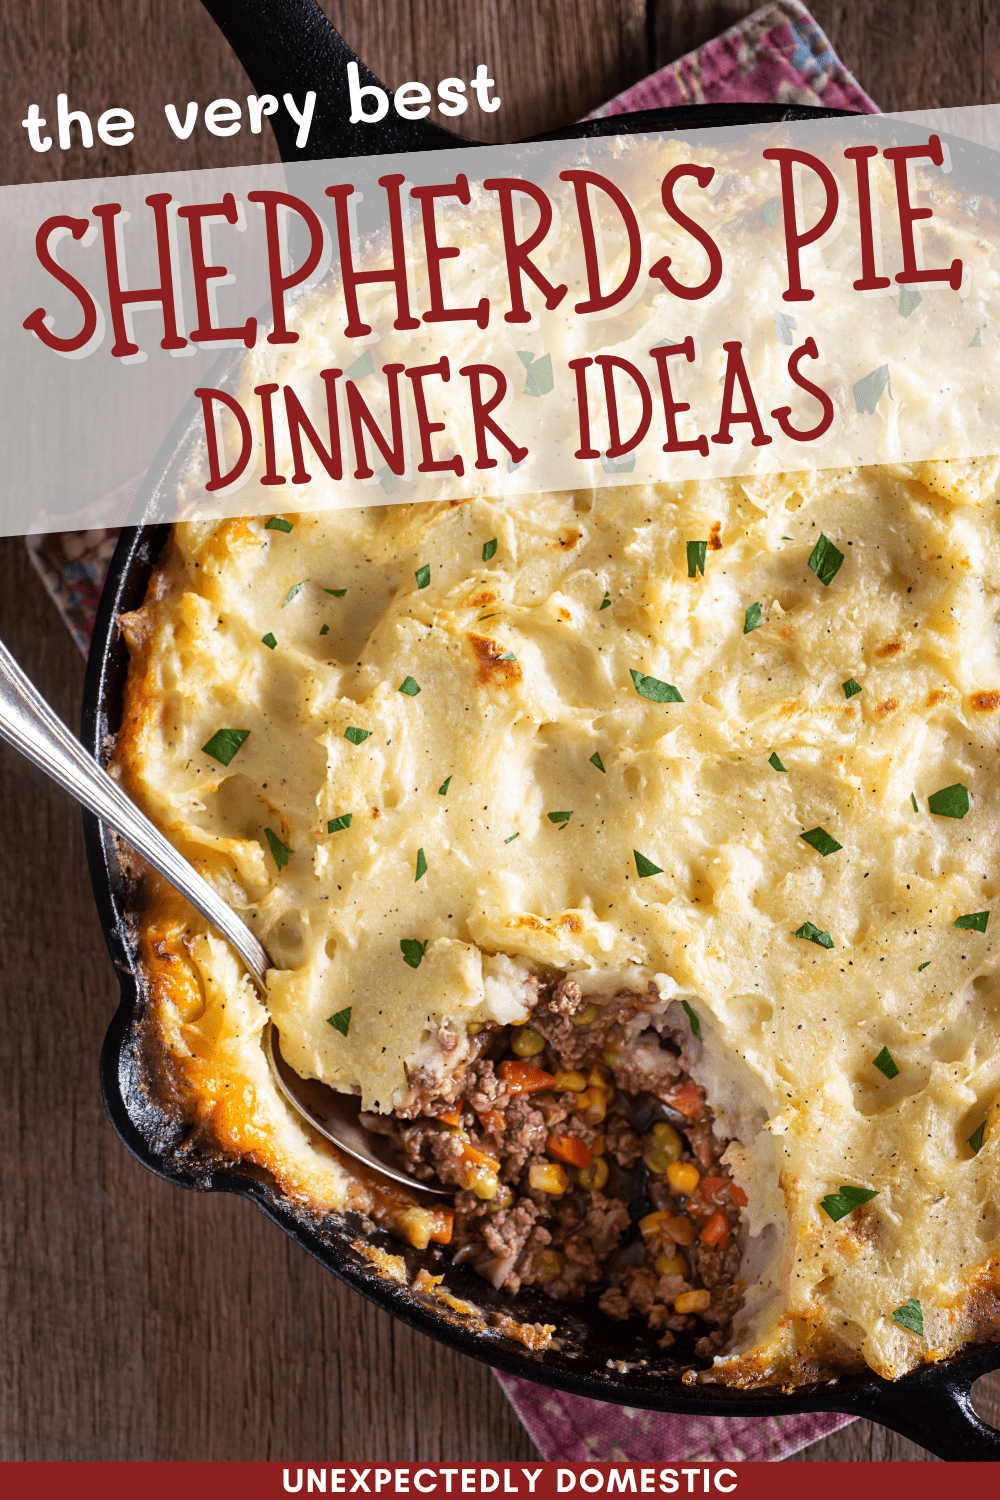 What to serve with shepherd’s pie! Here are the best side dishes for cottage pie so you can create an amazing, classic comfort food meal.